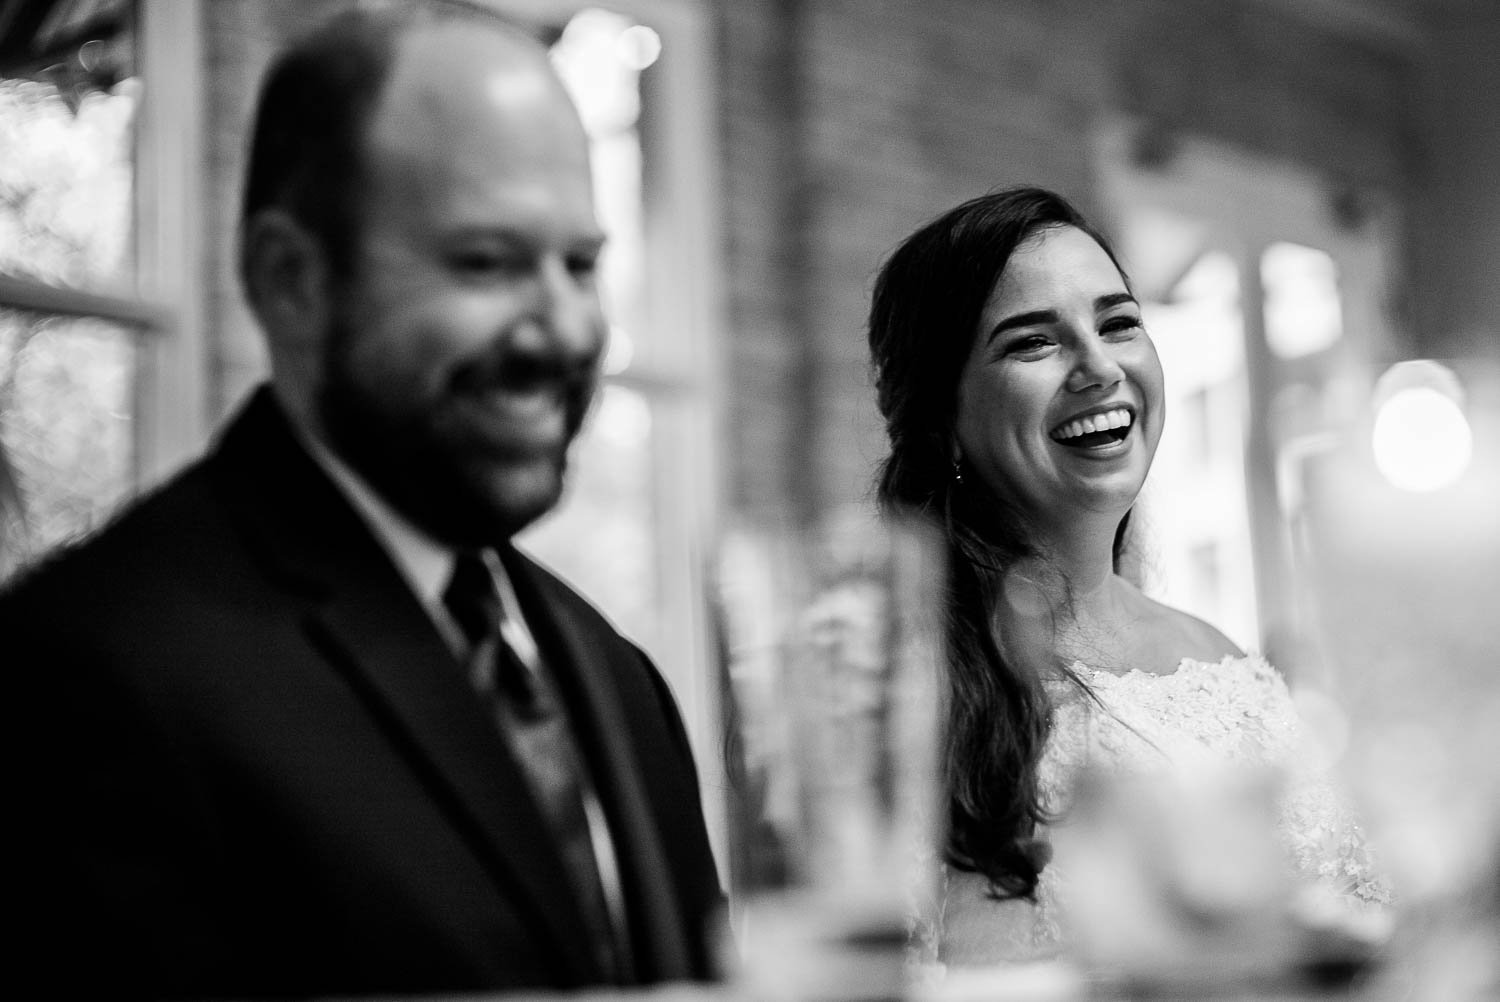 During the toasts, bride and groom react laughing Za Za Gardens Wedding Reception-Leica photographer-Philip Thomas Photography